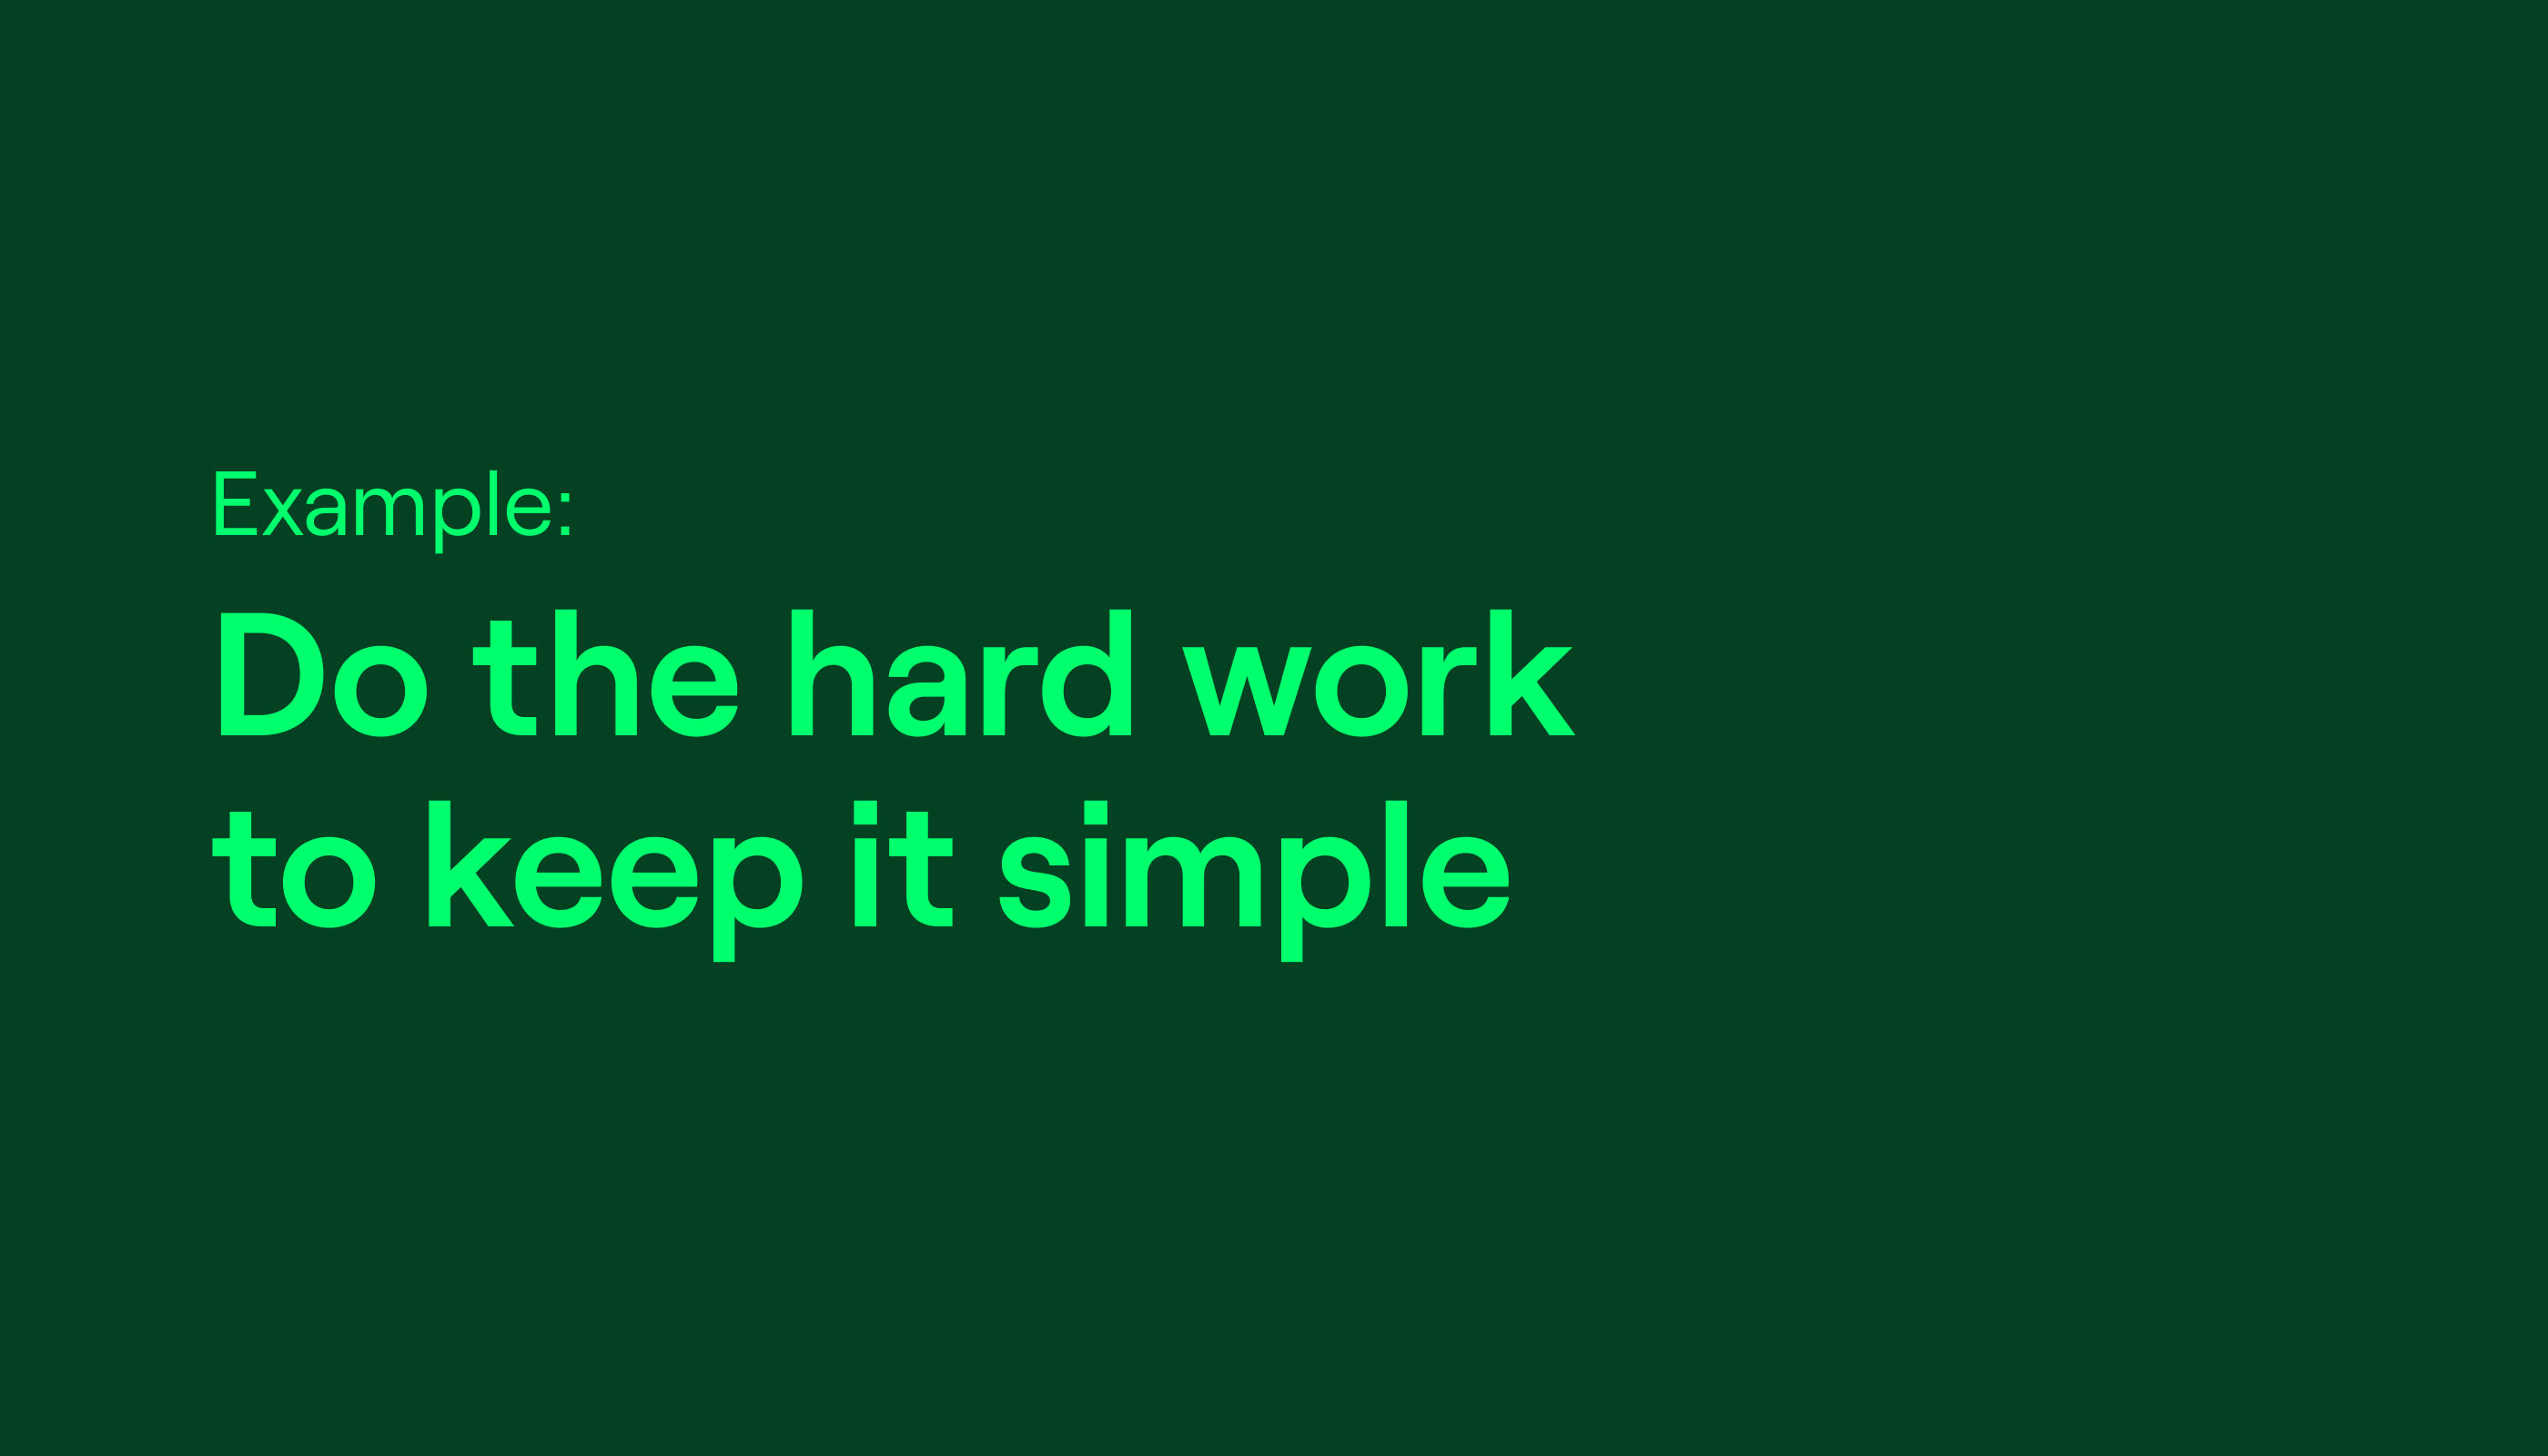 An example product principle that says: Do the hard work to keep it simple